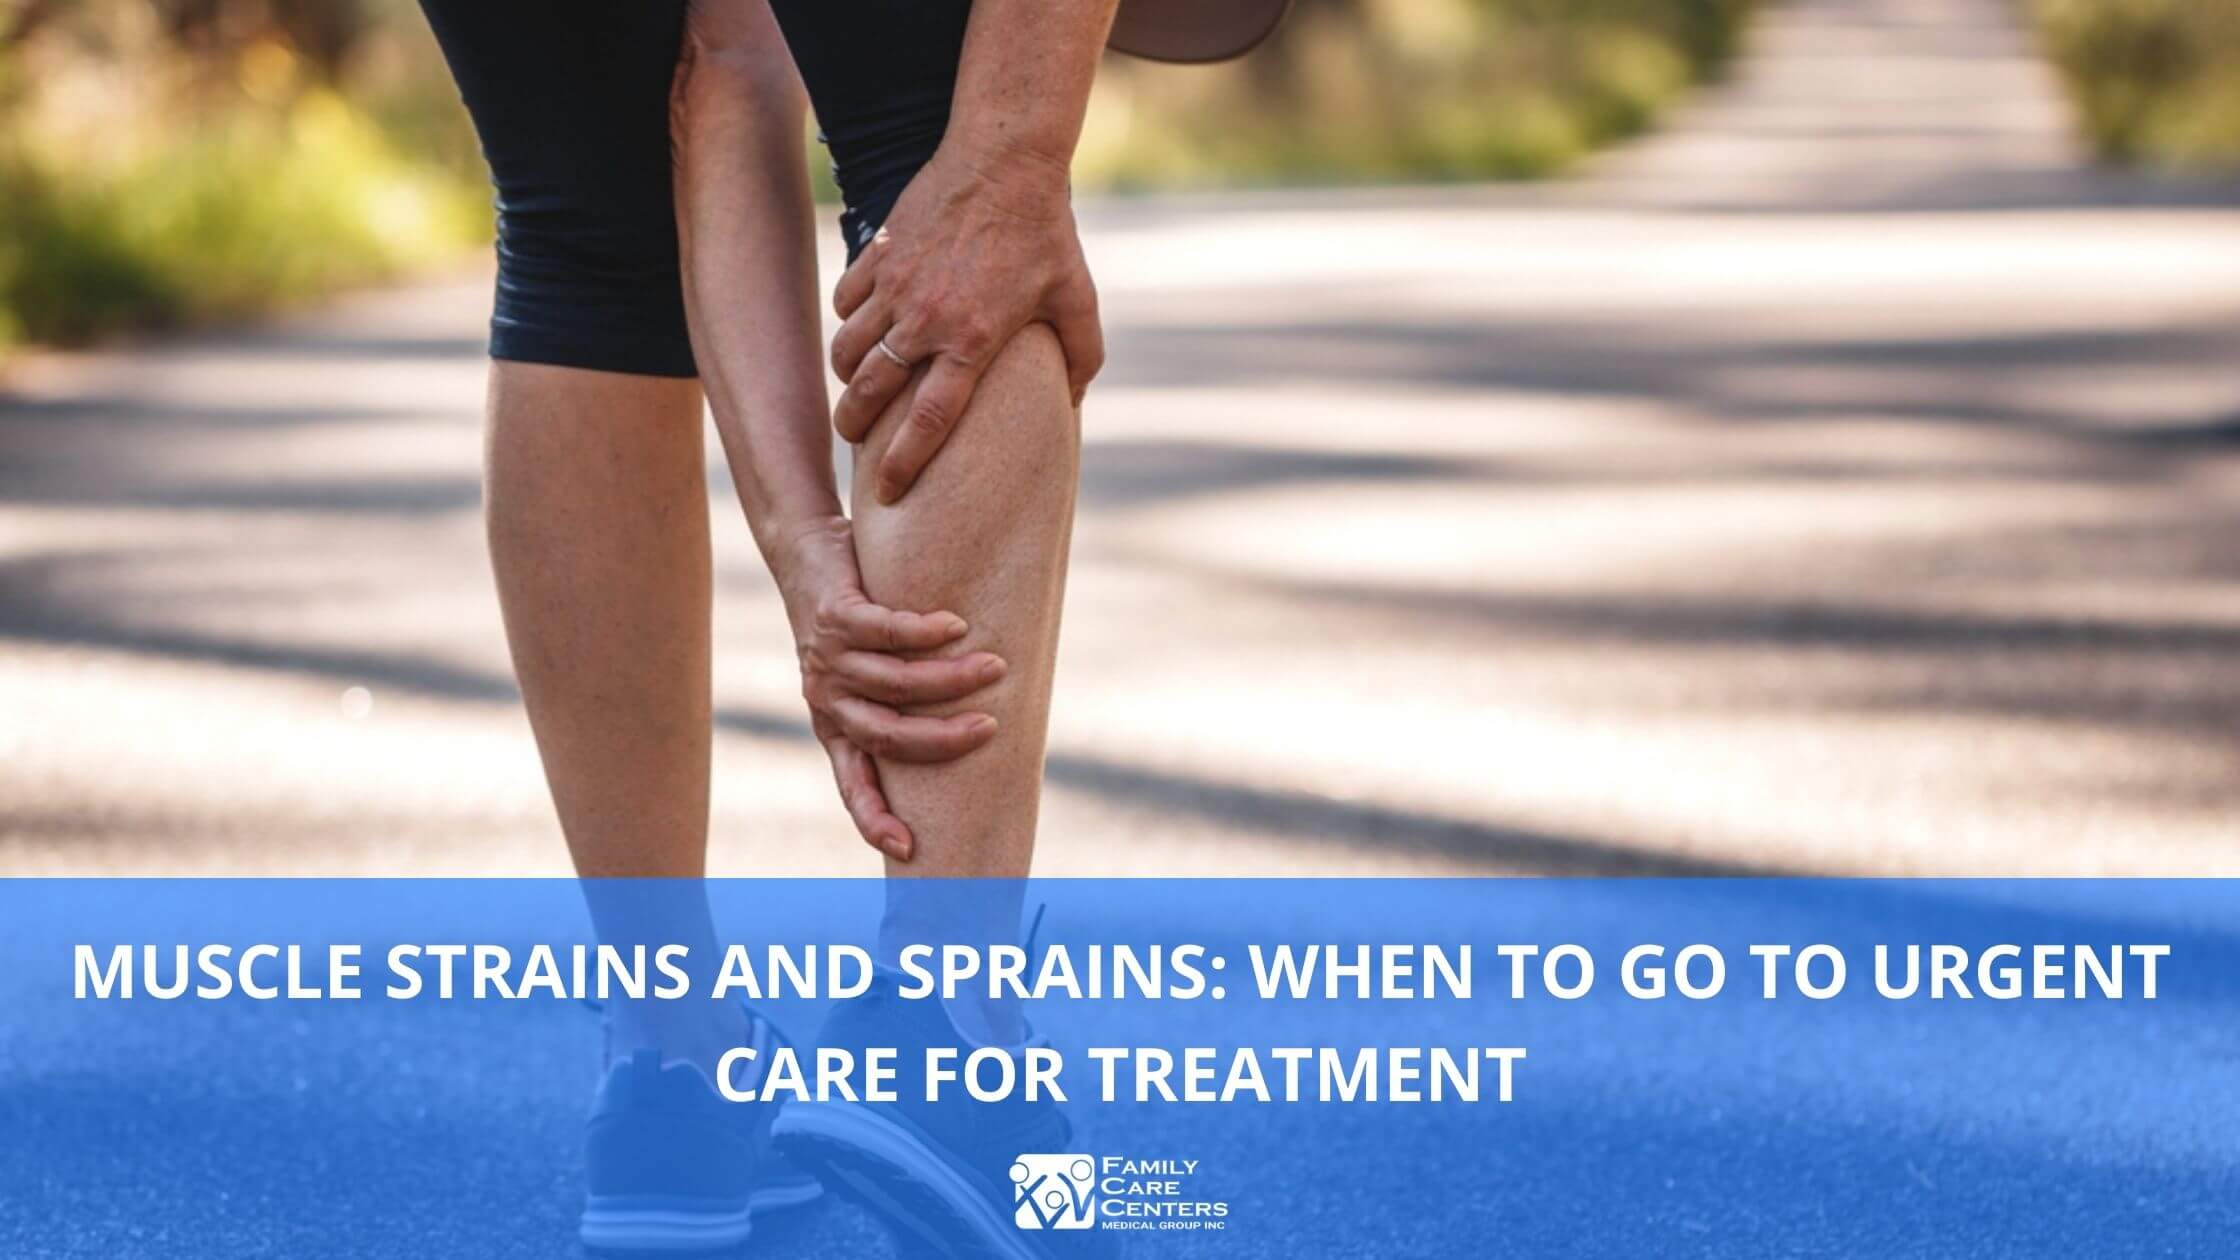 Muscle Strains and Sprains: When to Go to Urgent Care for Treatment